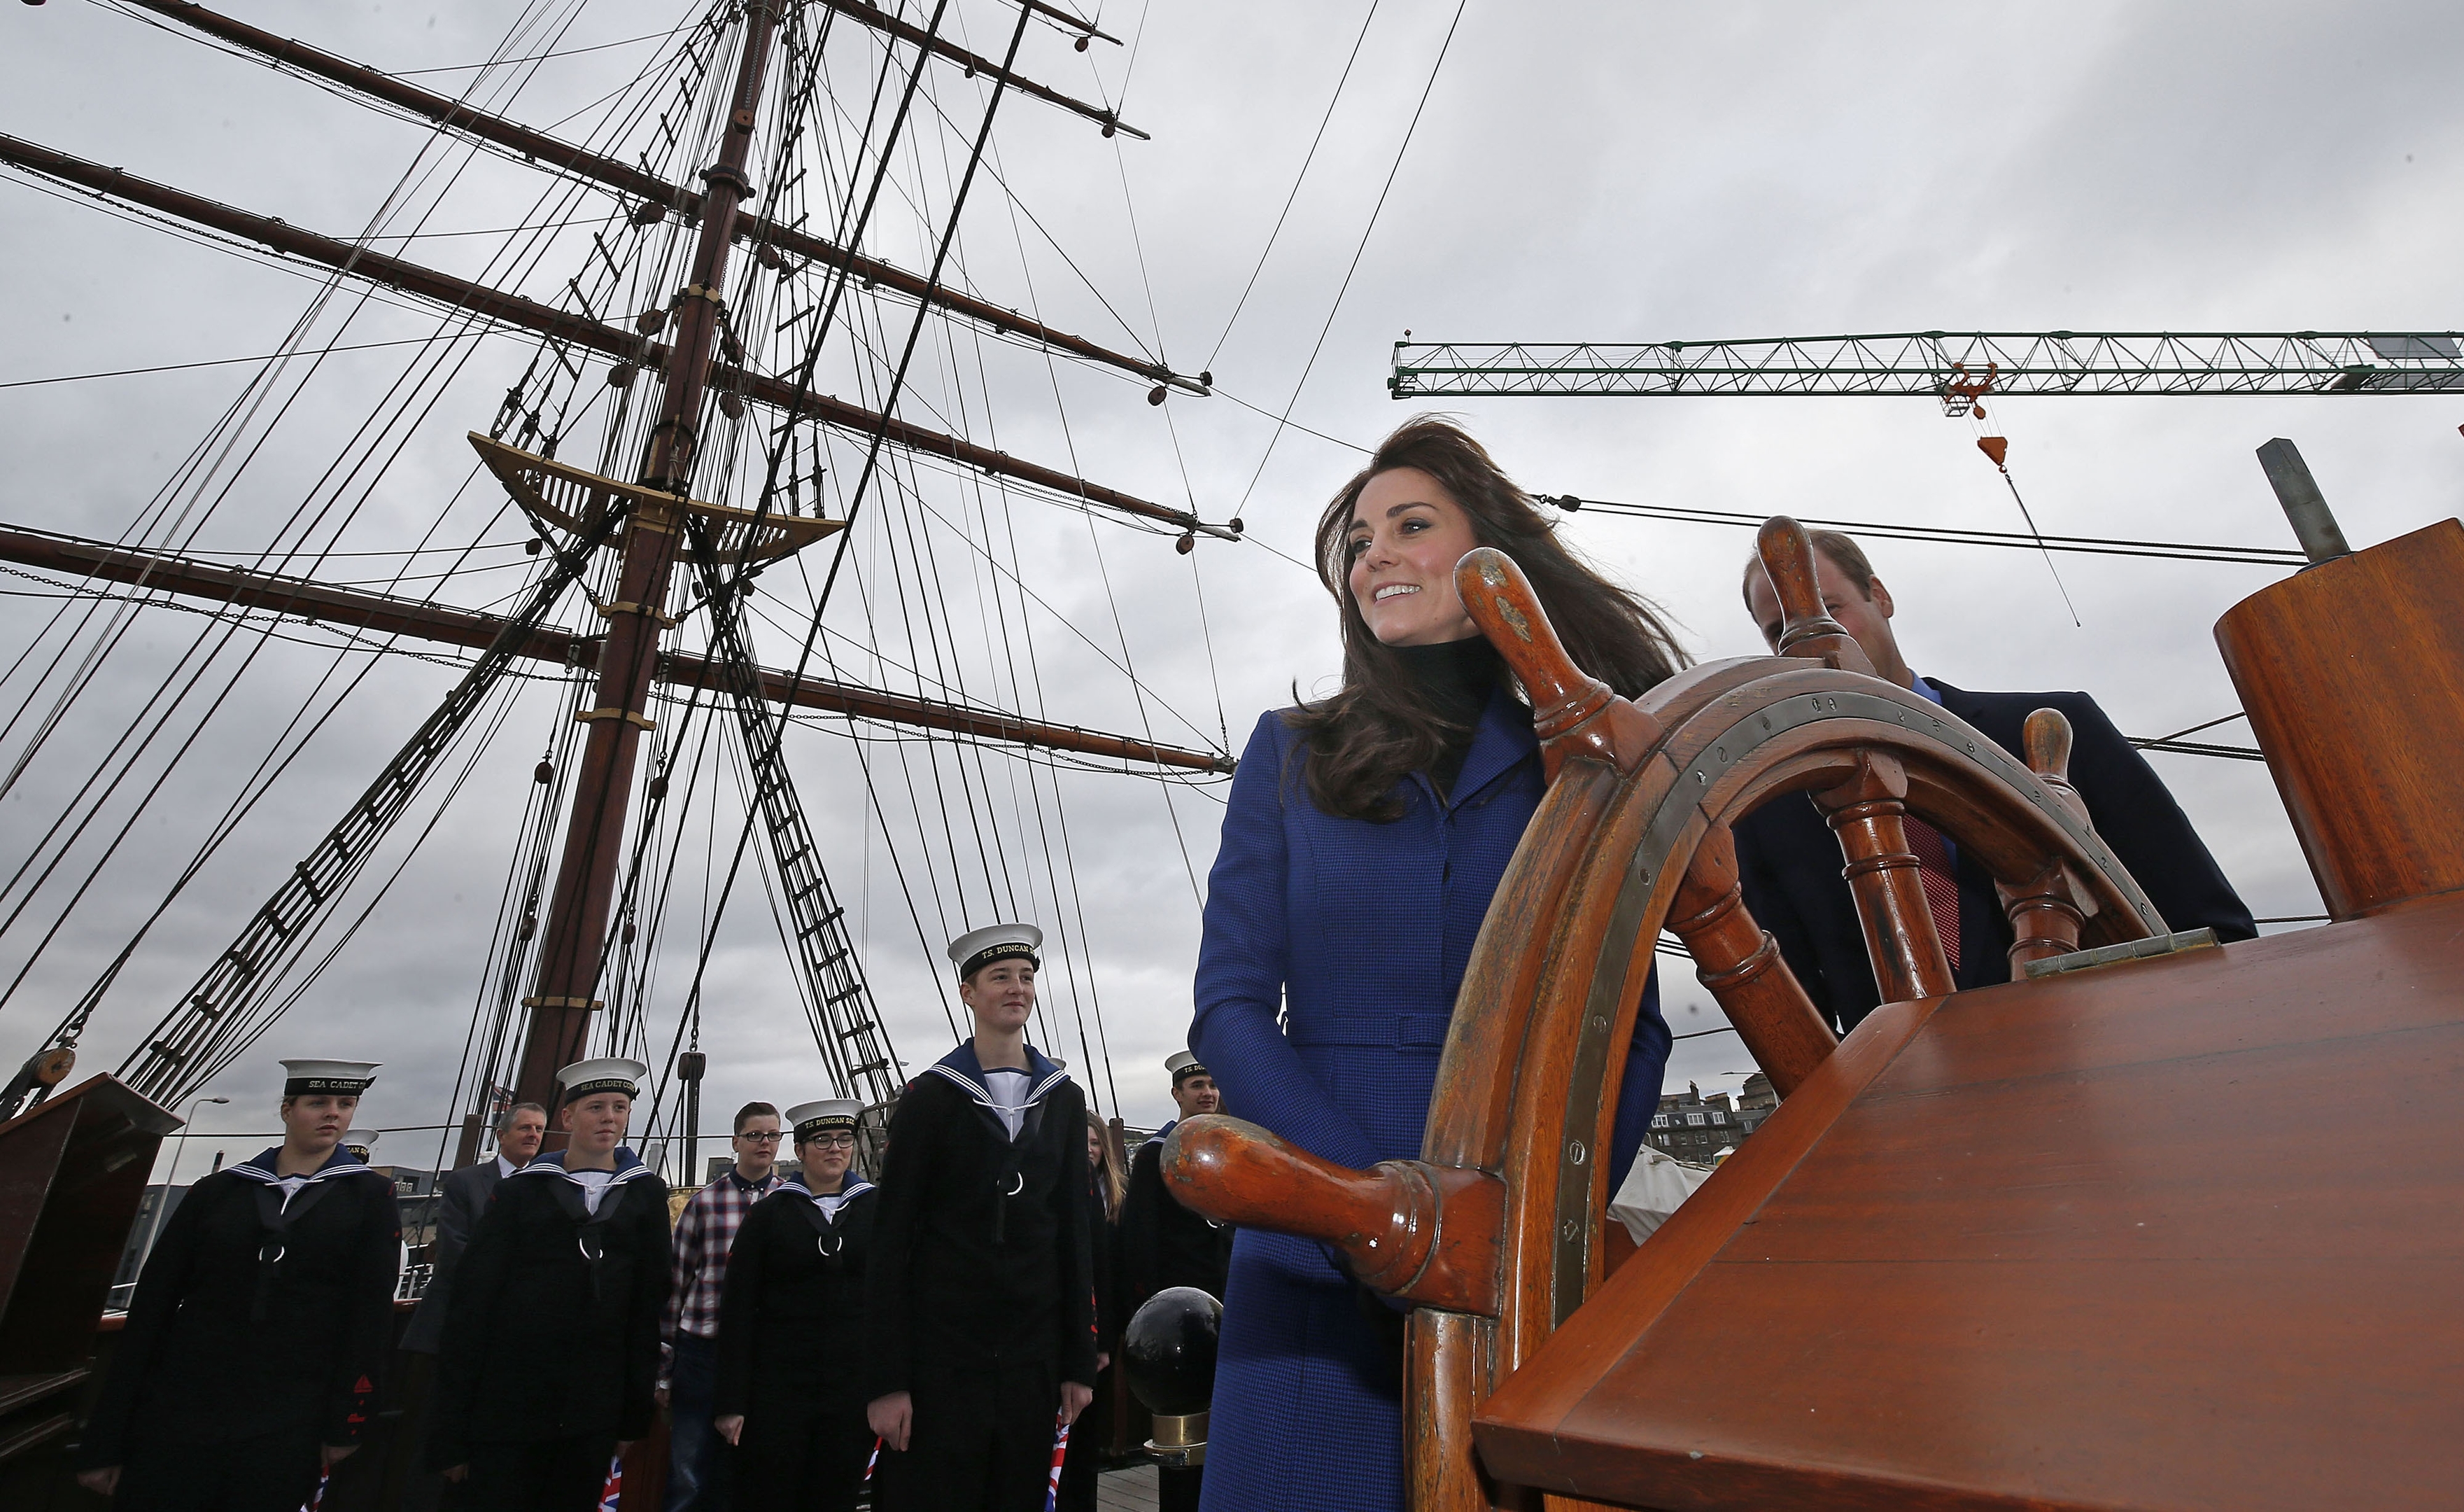 The Duke and Duchess of Cambridge, who are also known as the Earl and Countess of Strathearn in Scotland during their visit to the original Royal Research Ship Discovery as part of their visit to Dundee in Scotland. 